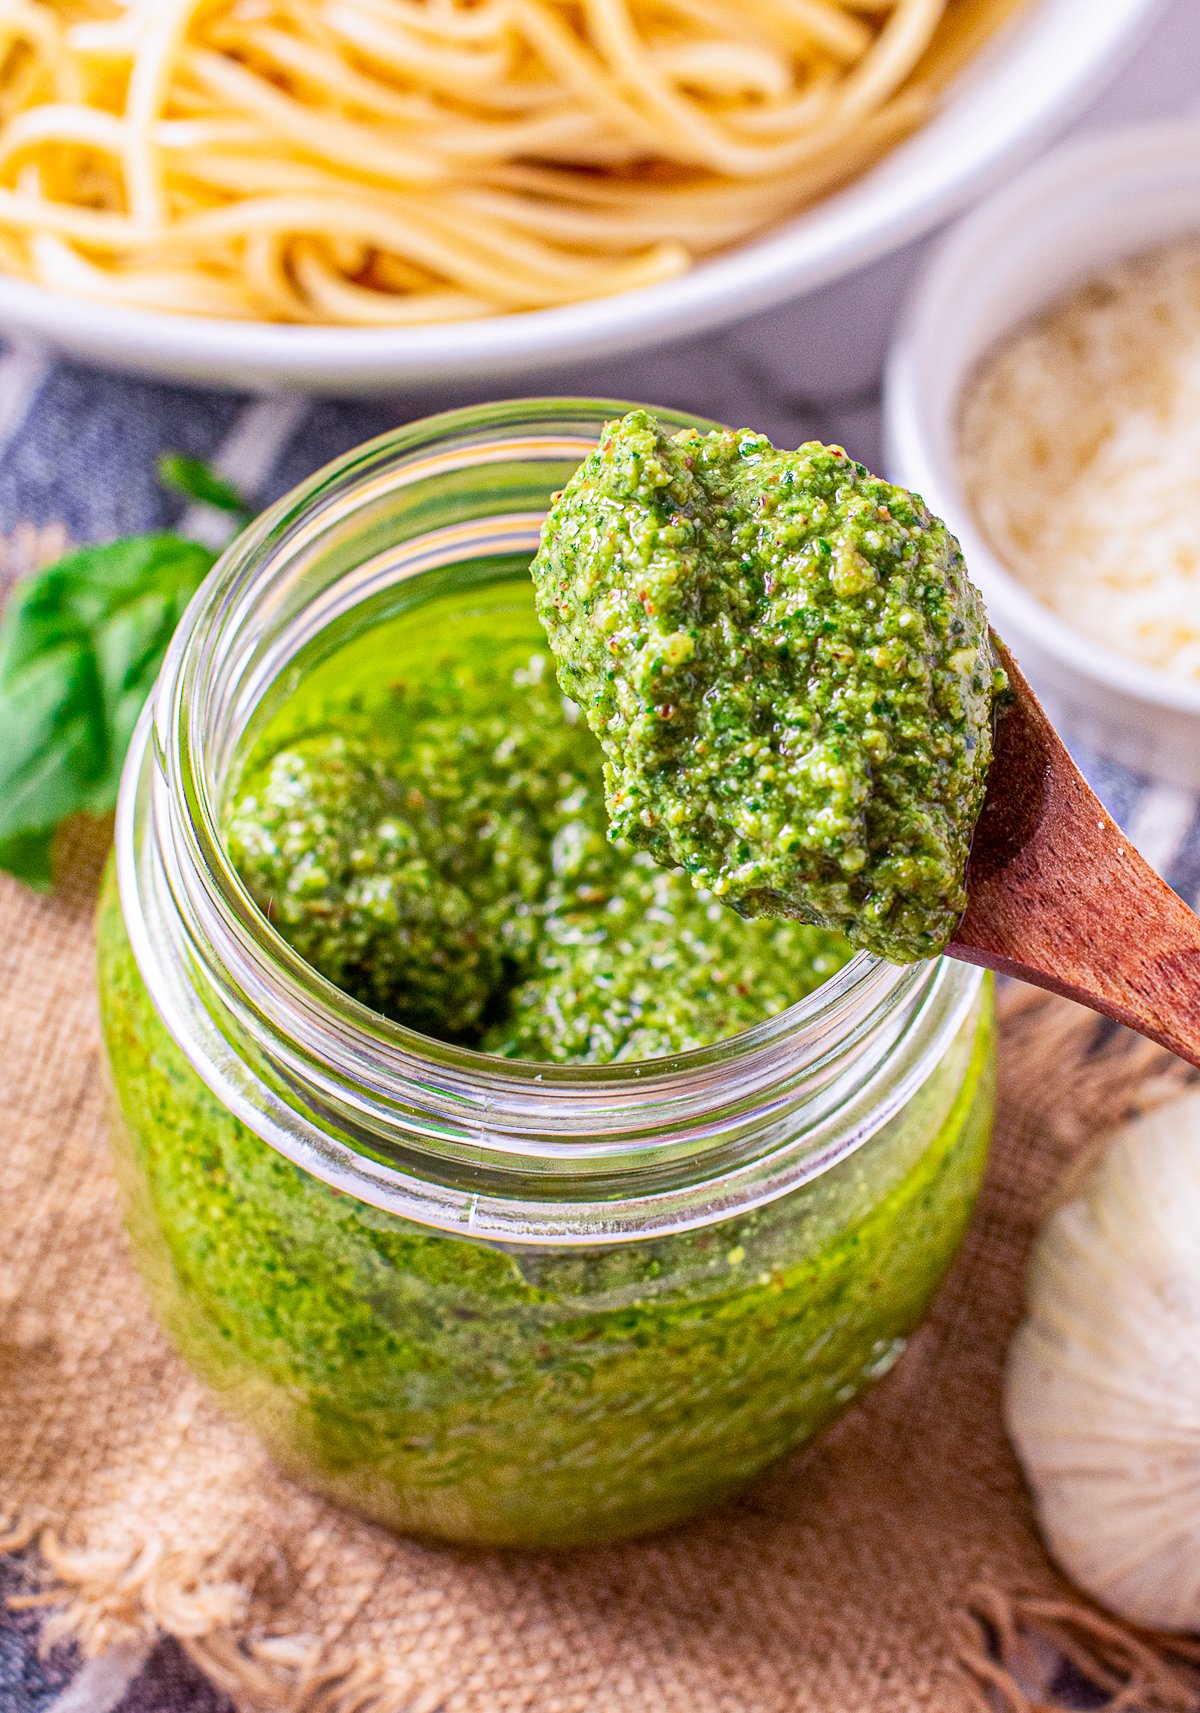 Spoon holding up some pesto from jar.